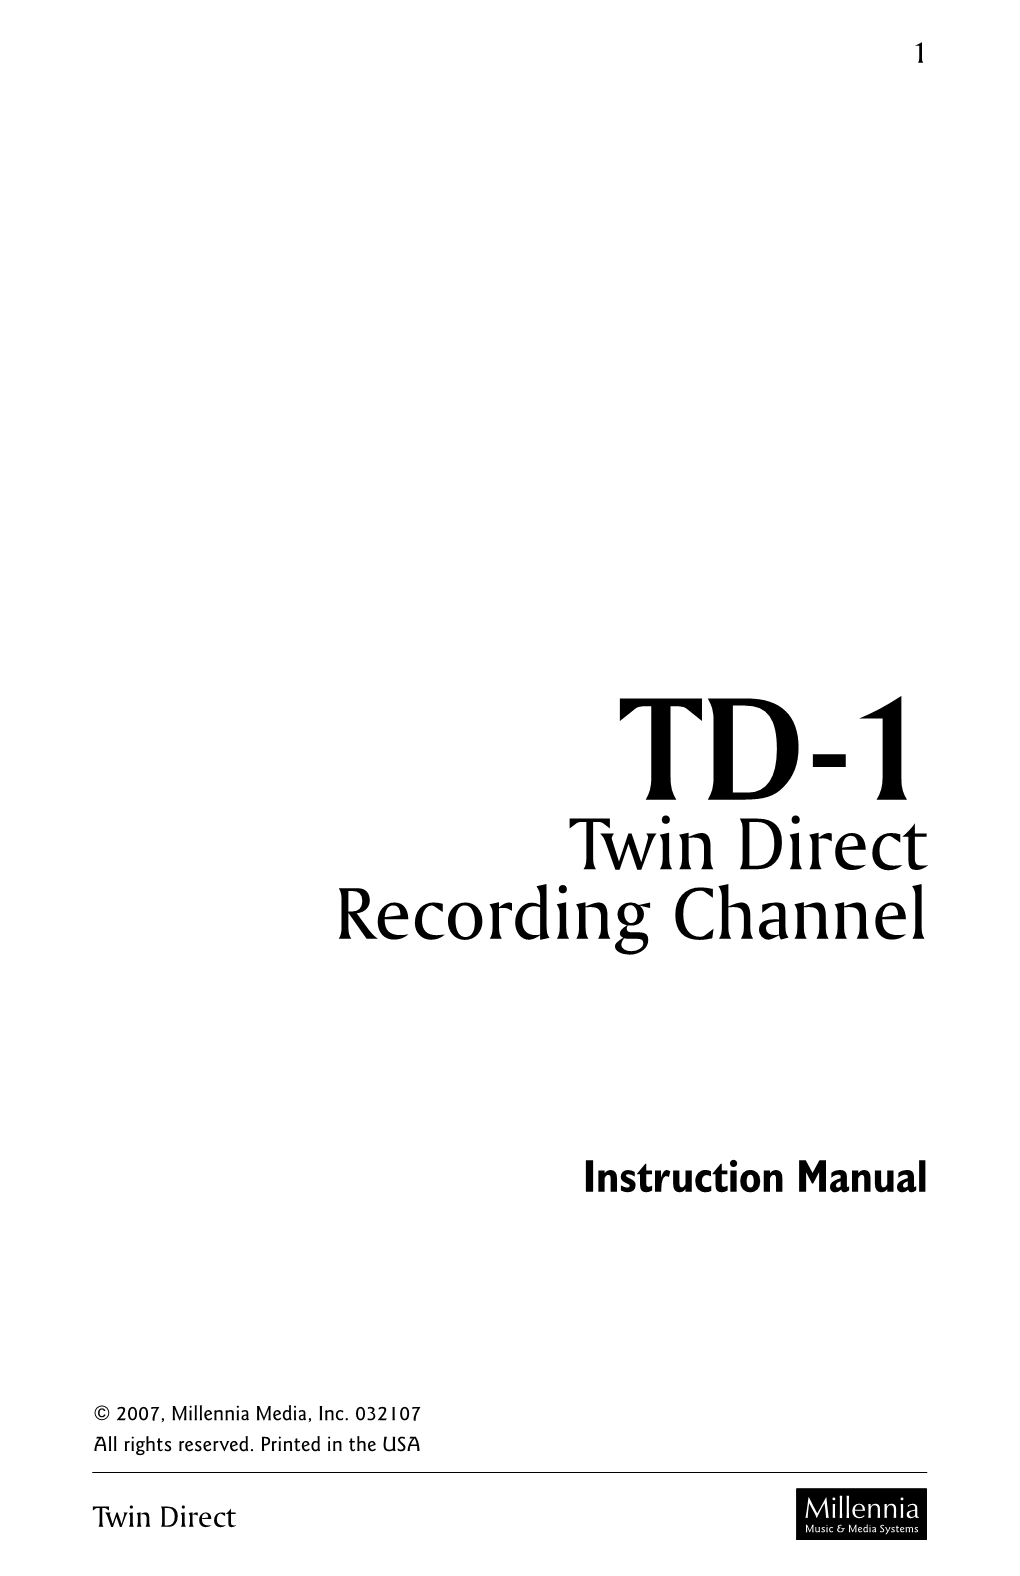 TD-1 Twin Direct Recording Channel